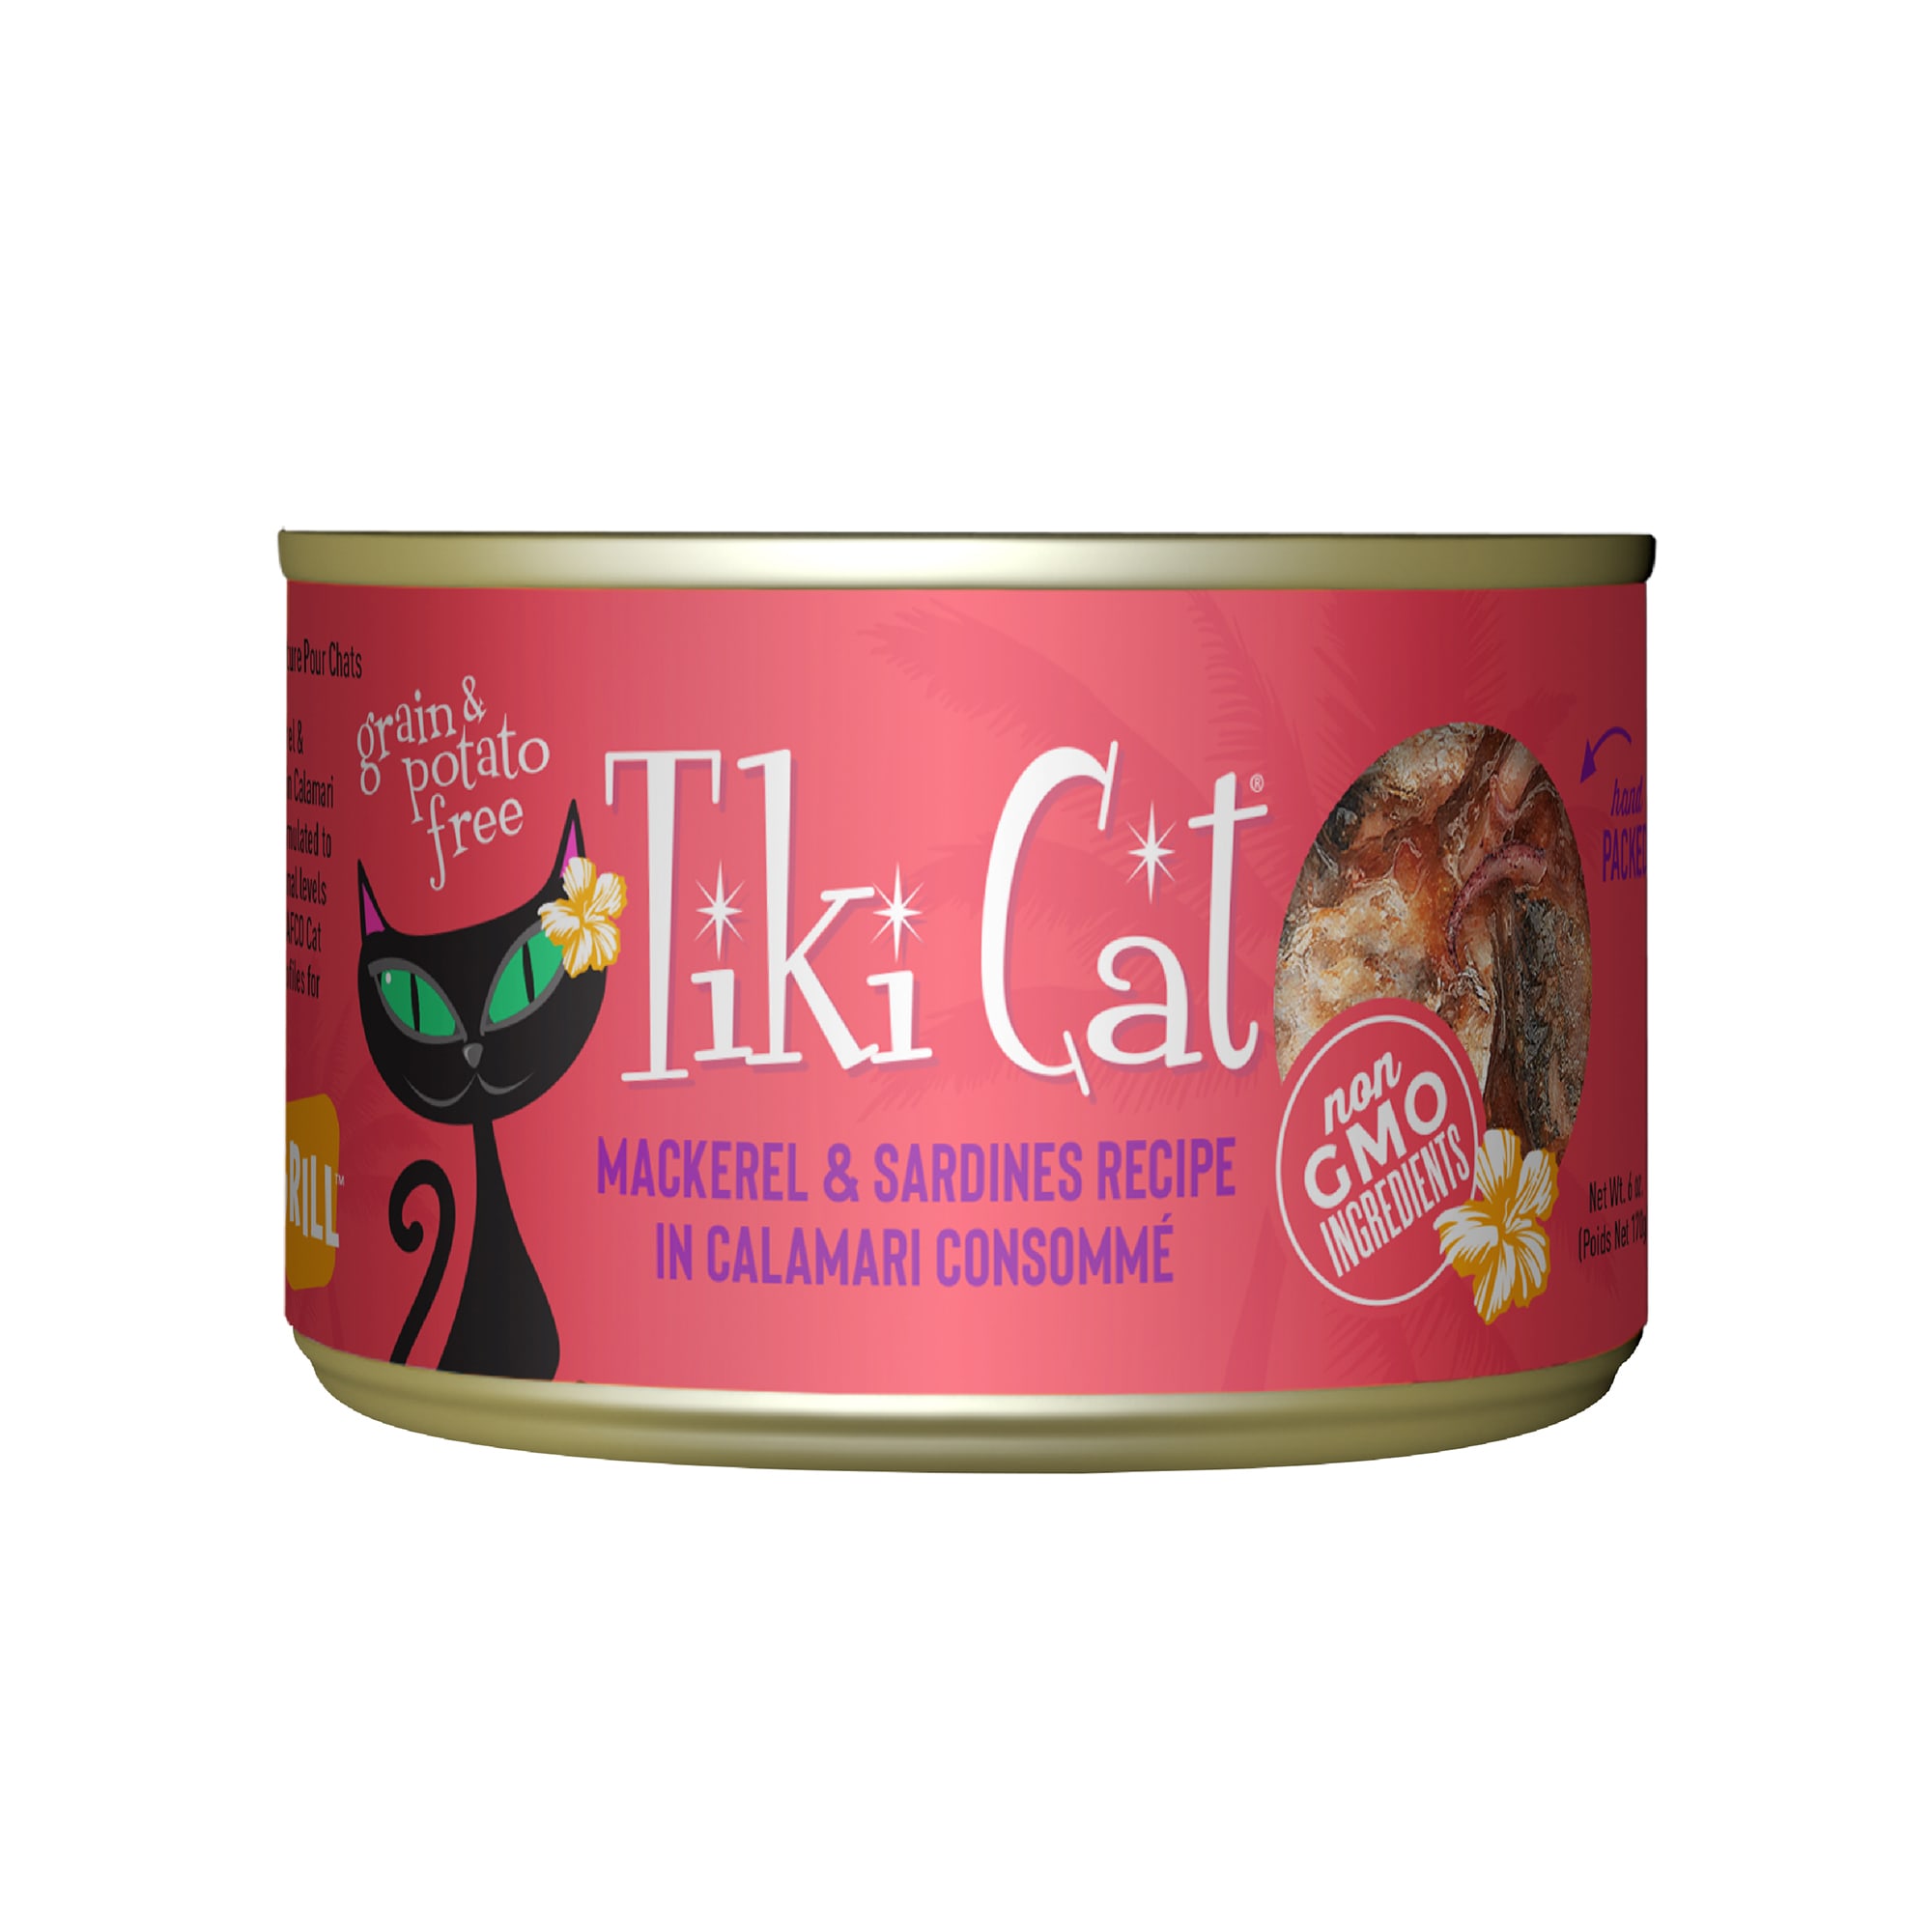 canned mackerel for cats